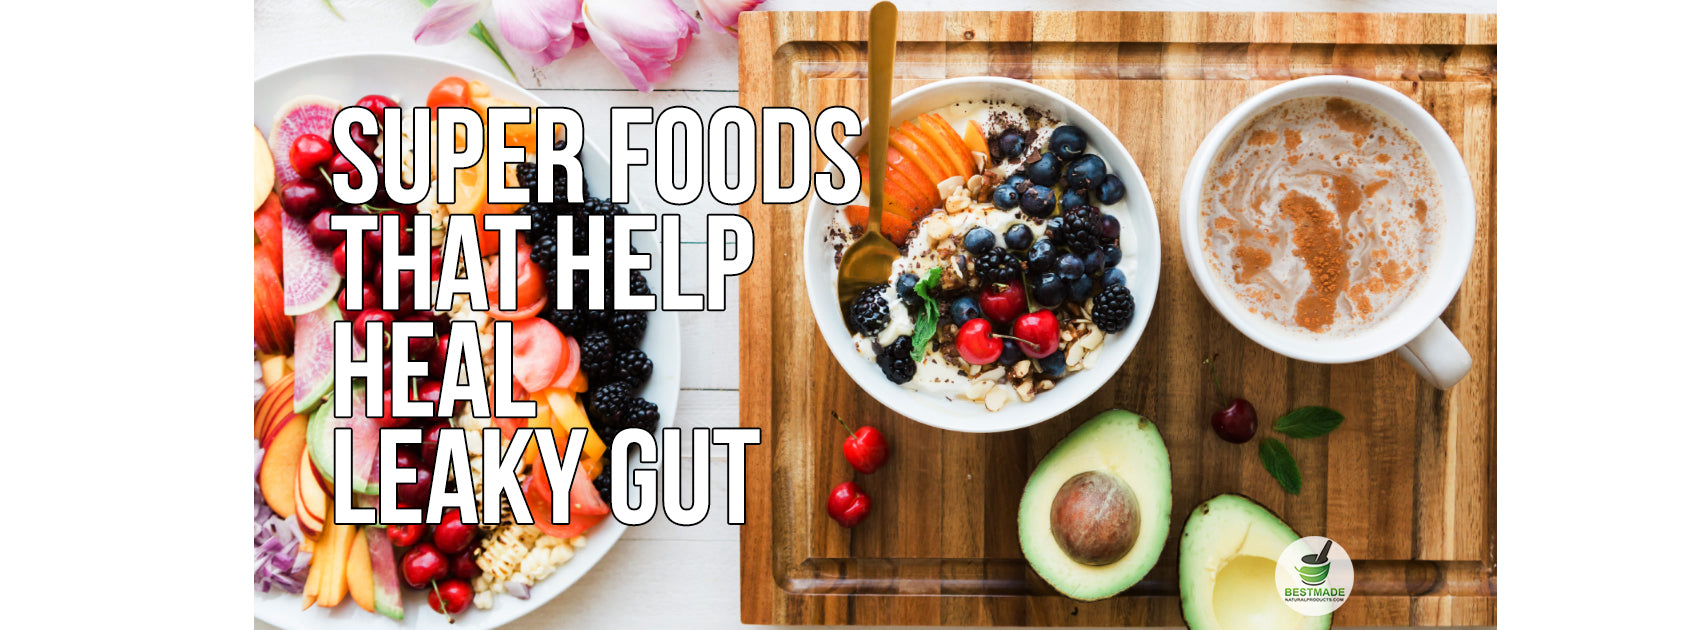 Super Foods That May Helps Heal Leaky Gut